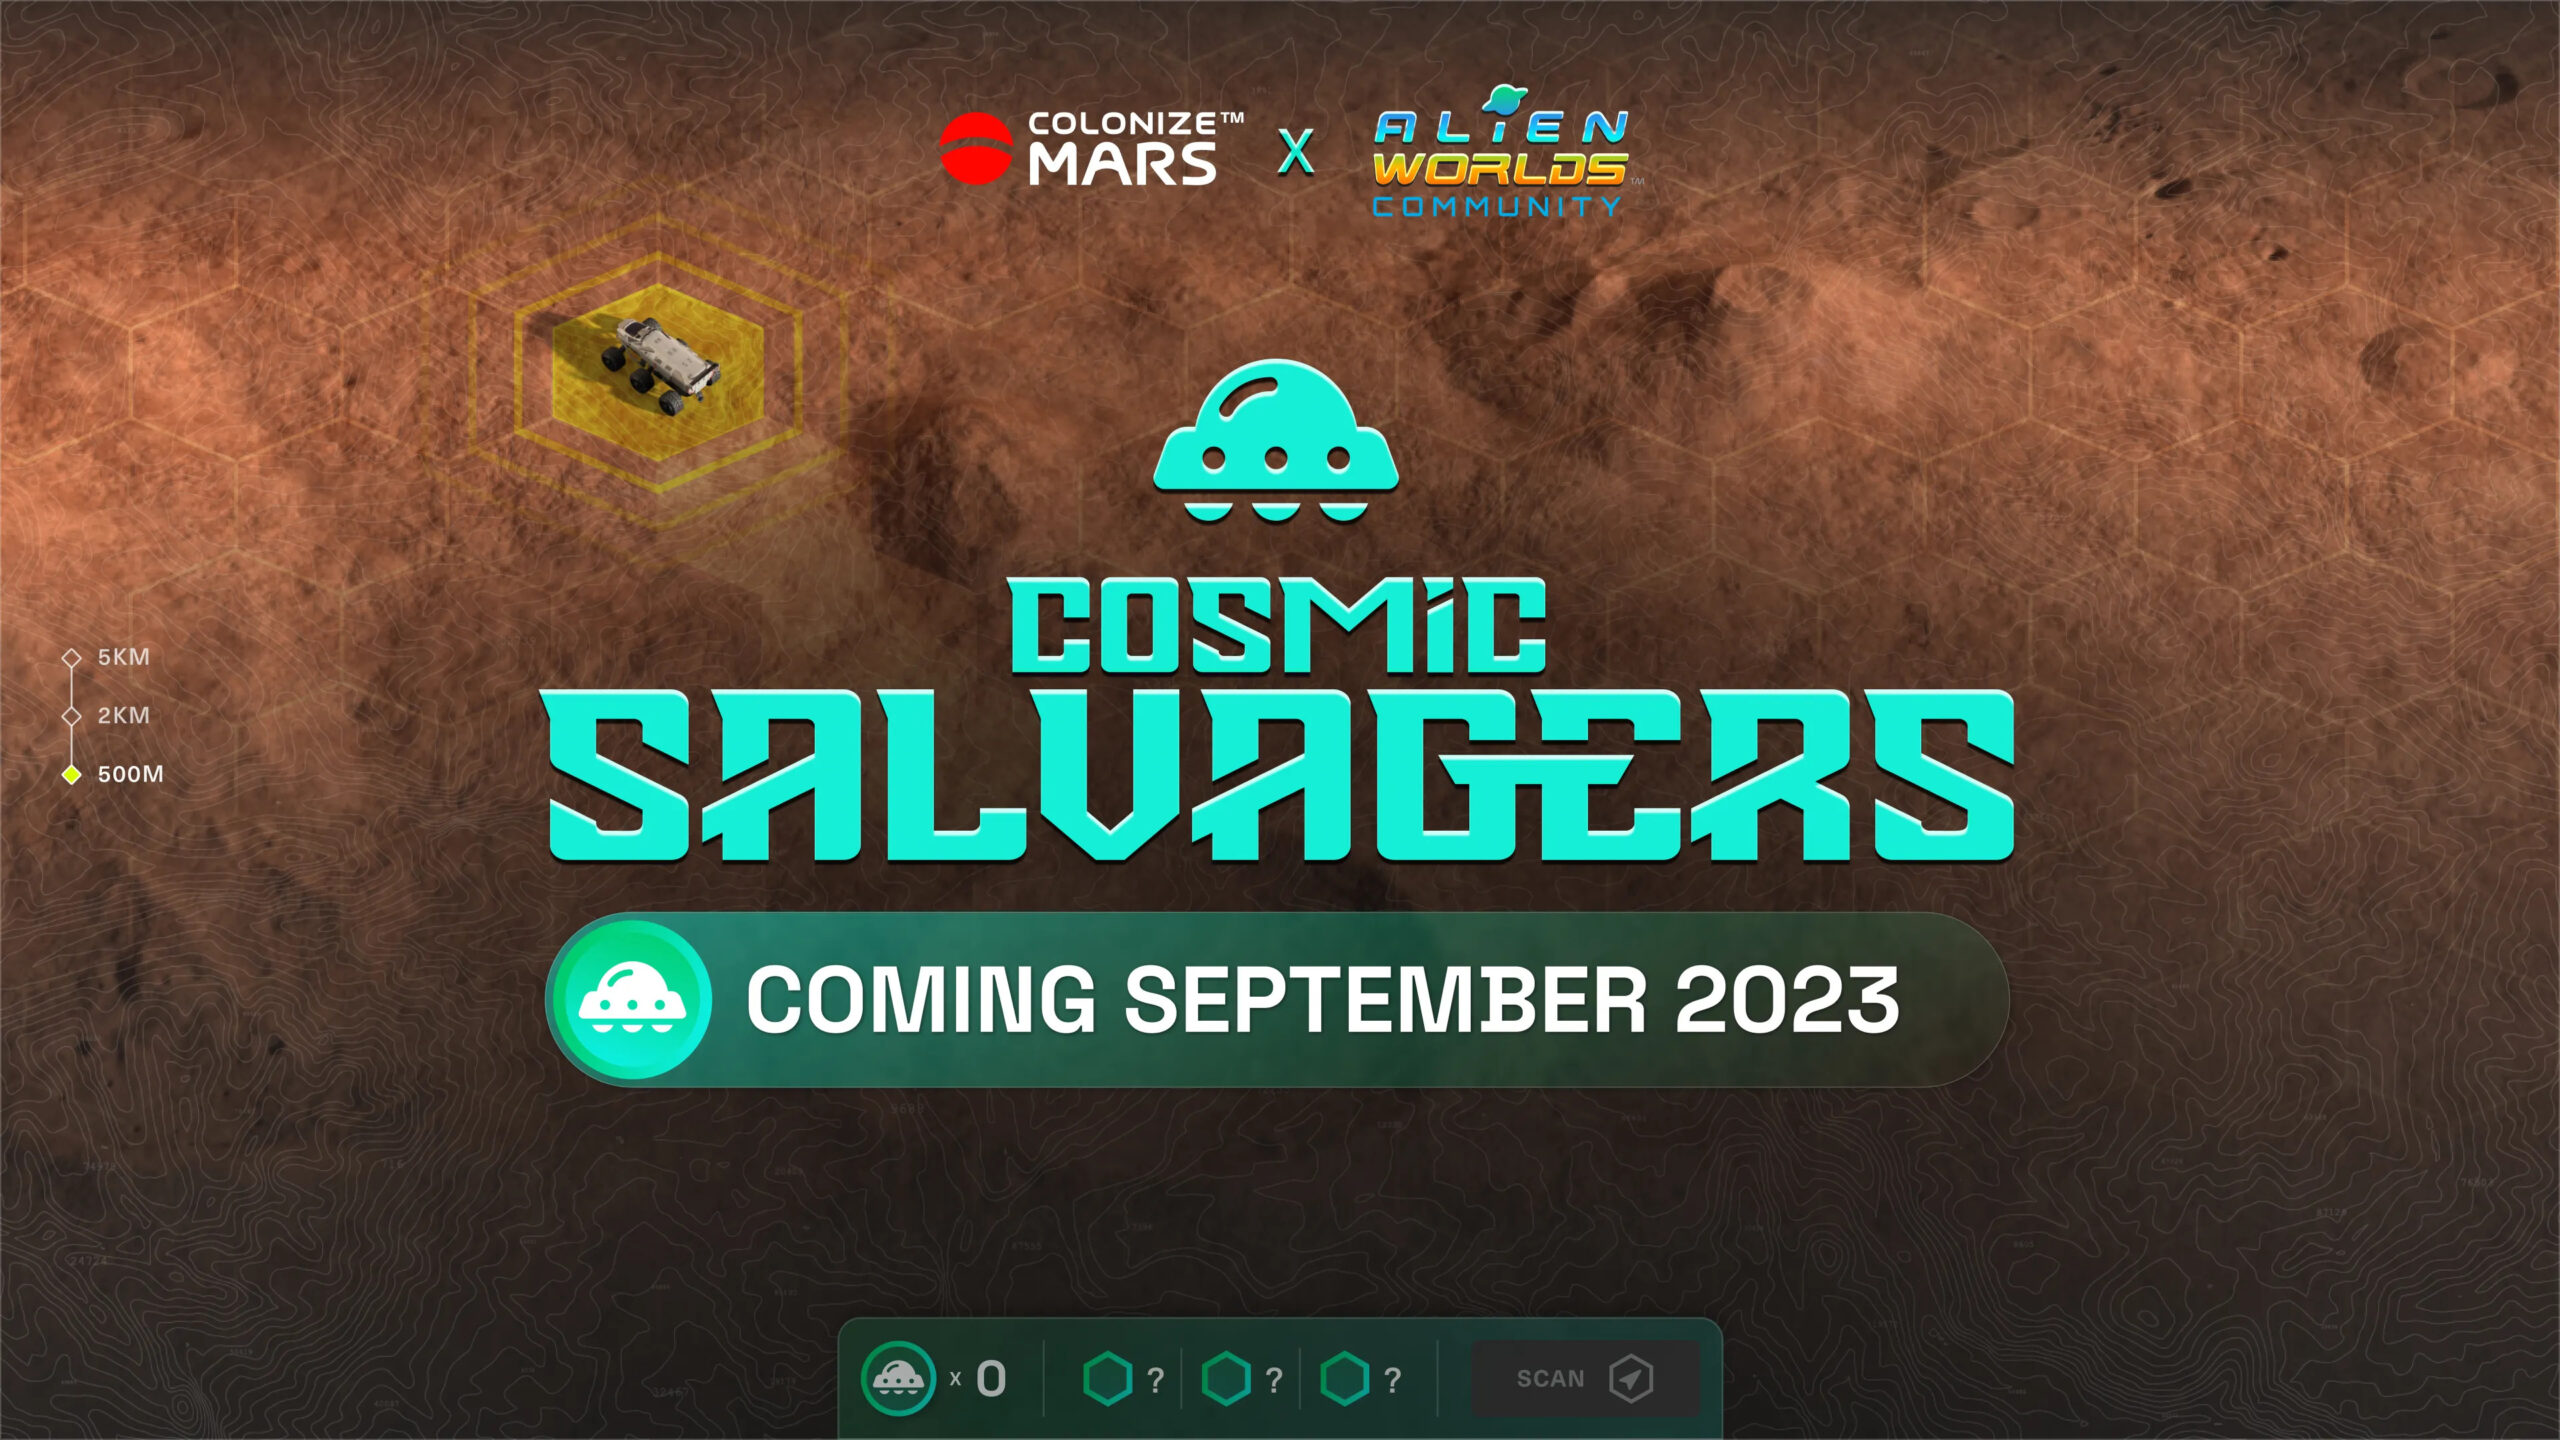 Alien Worlds and Colonize Mars Team Up For Cosmic Salvagers